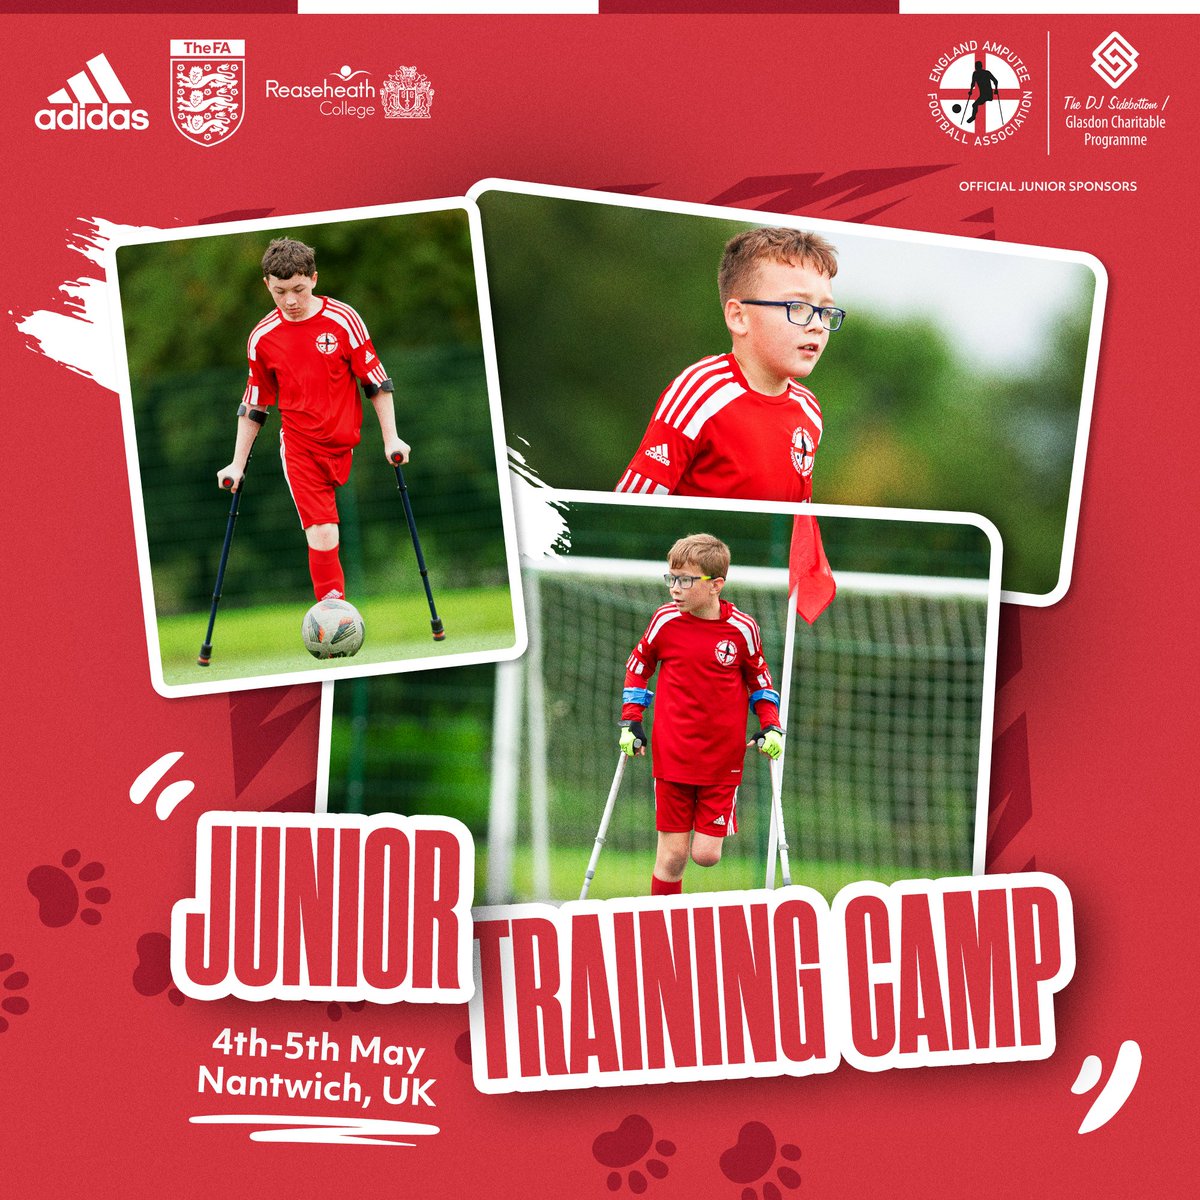 𝗝𝘂𝗻𝗶𝗼𝗿 𝗮𝗰𝘁𝗶𝗼𝗻 𝗶𝘀 𝗯𝗮𝗰𝗸! 🦁 We're excited to welcome our junior players to the Home of Amputee Football for another weekend of training 😁 🤝 @djsprogramme #EAFAFamily